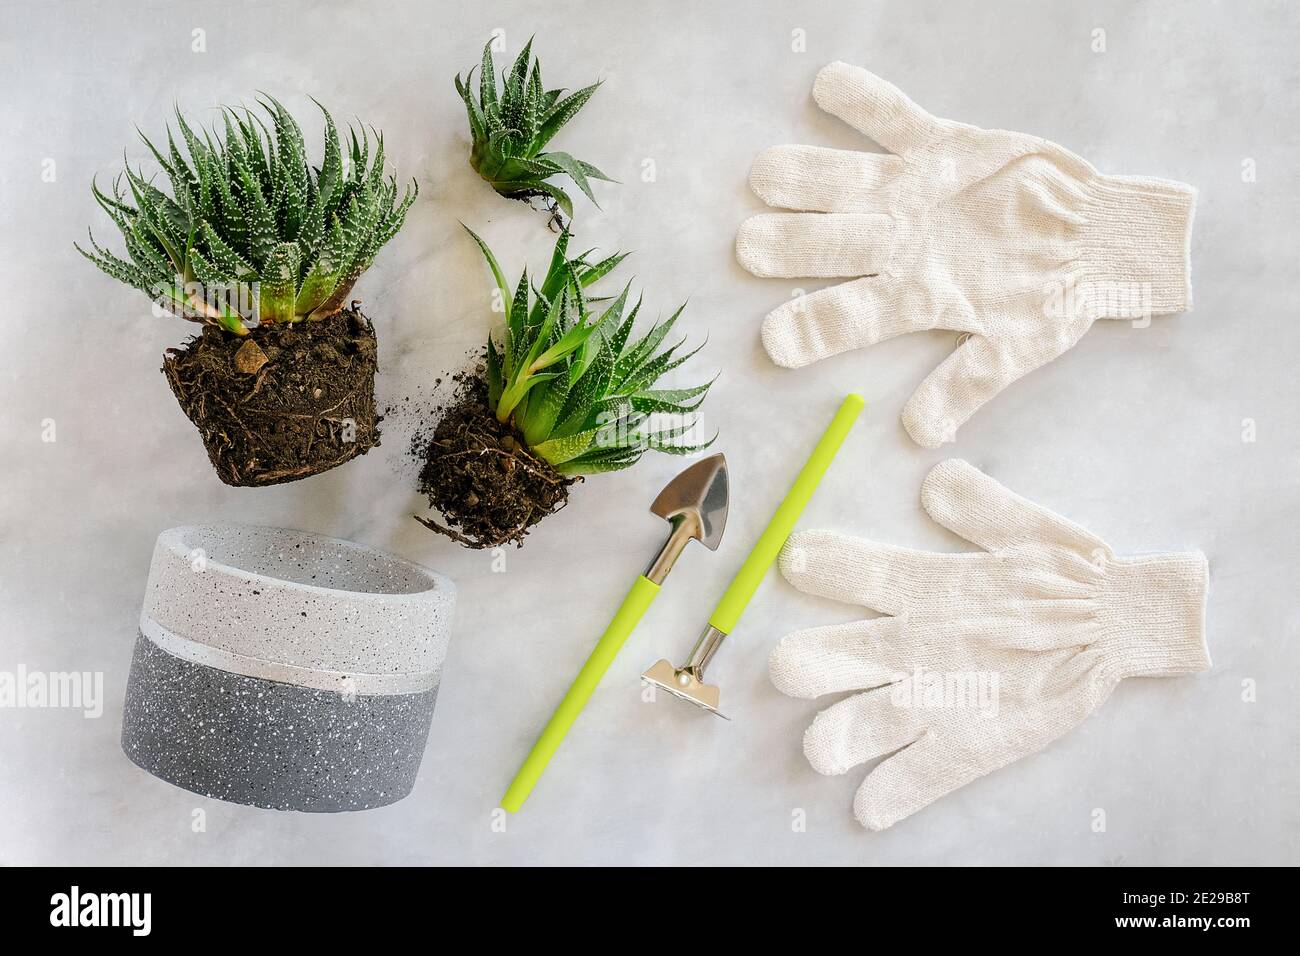 Transplanting indoor flowers and houseplant. Sprouts of green succulents, concrete pot, white gloves, rake and shovel tools on marble table. Concept f Stock Photo